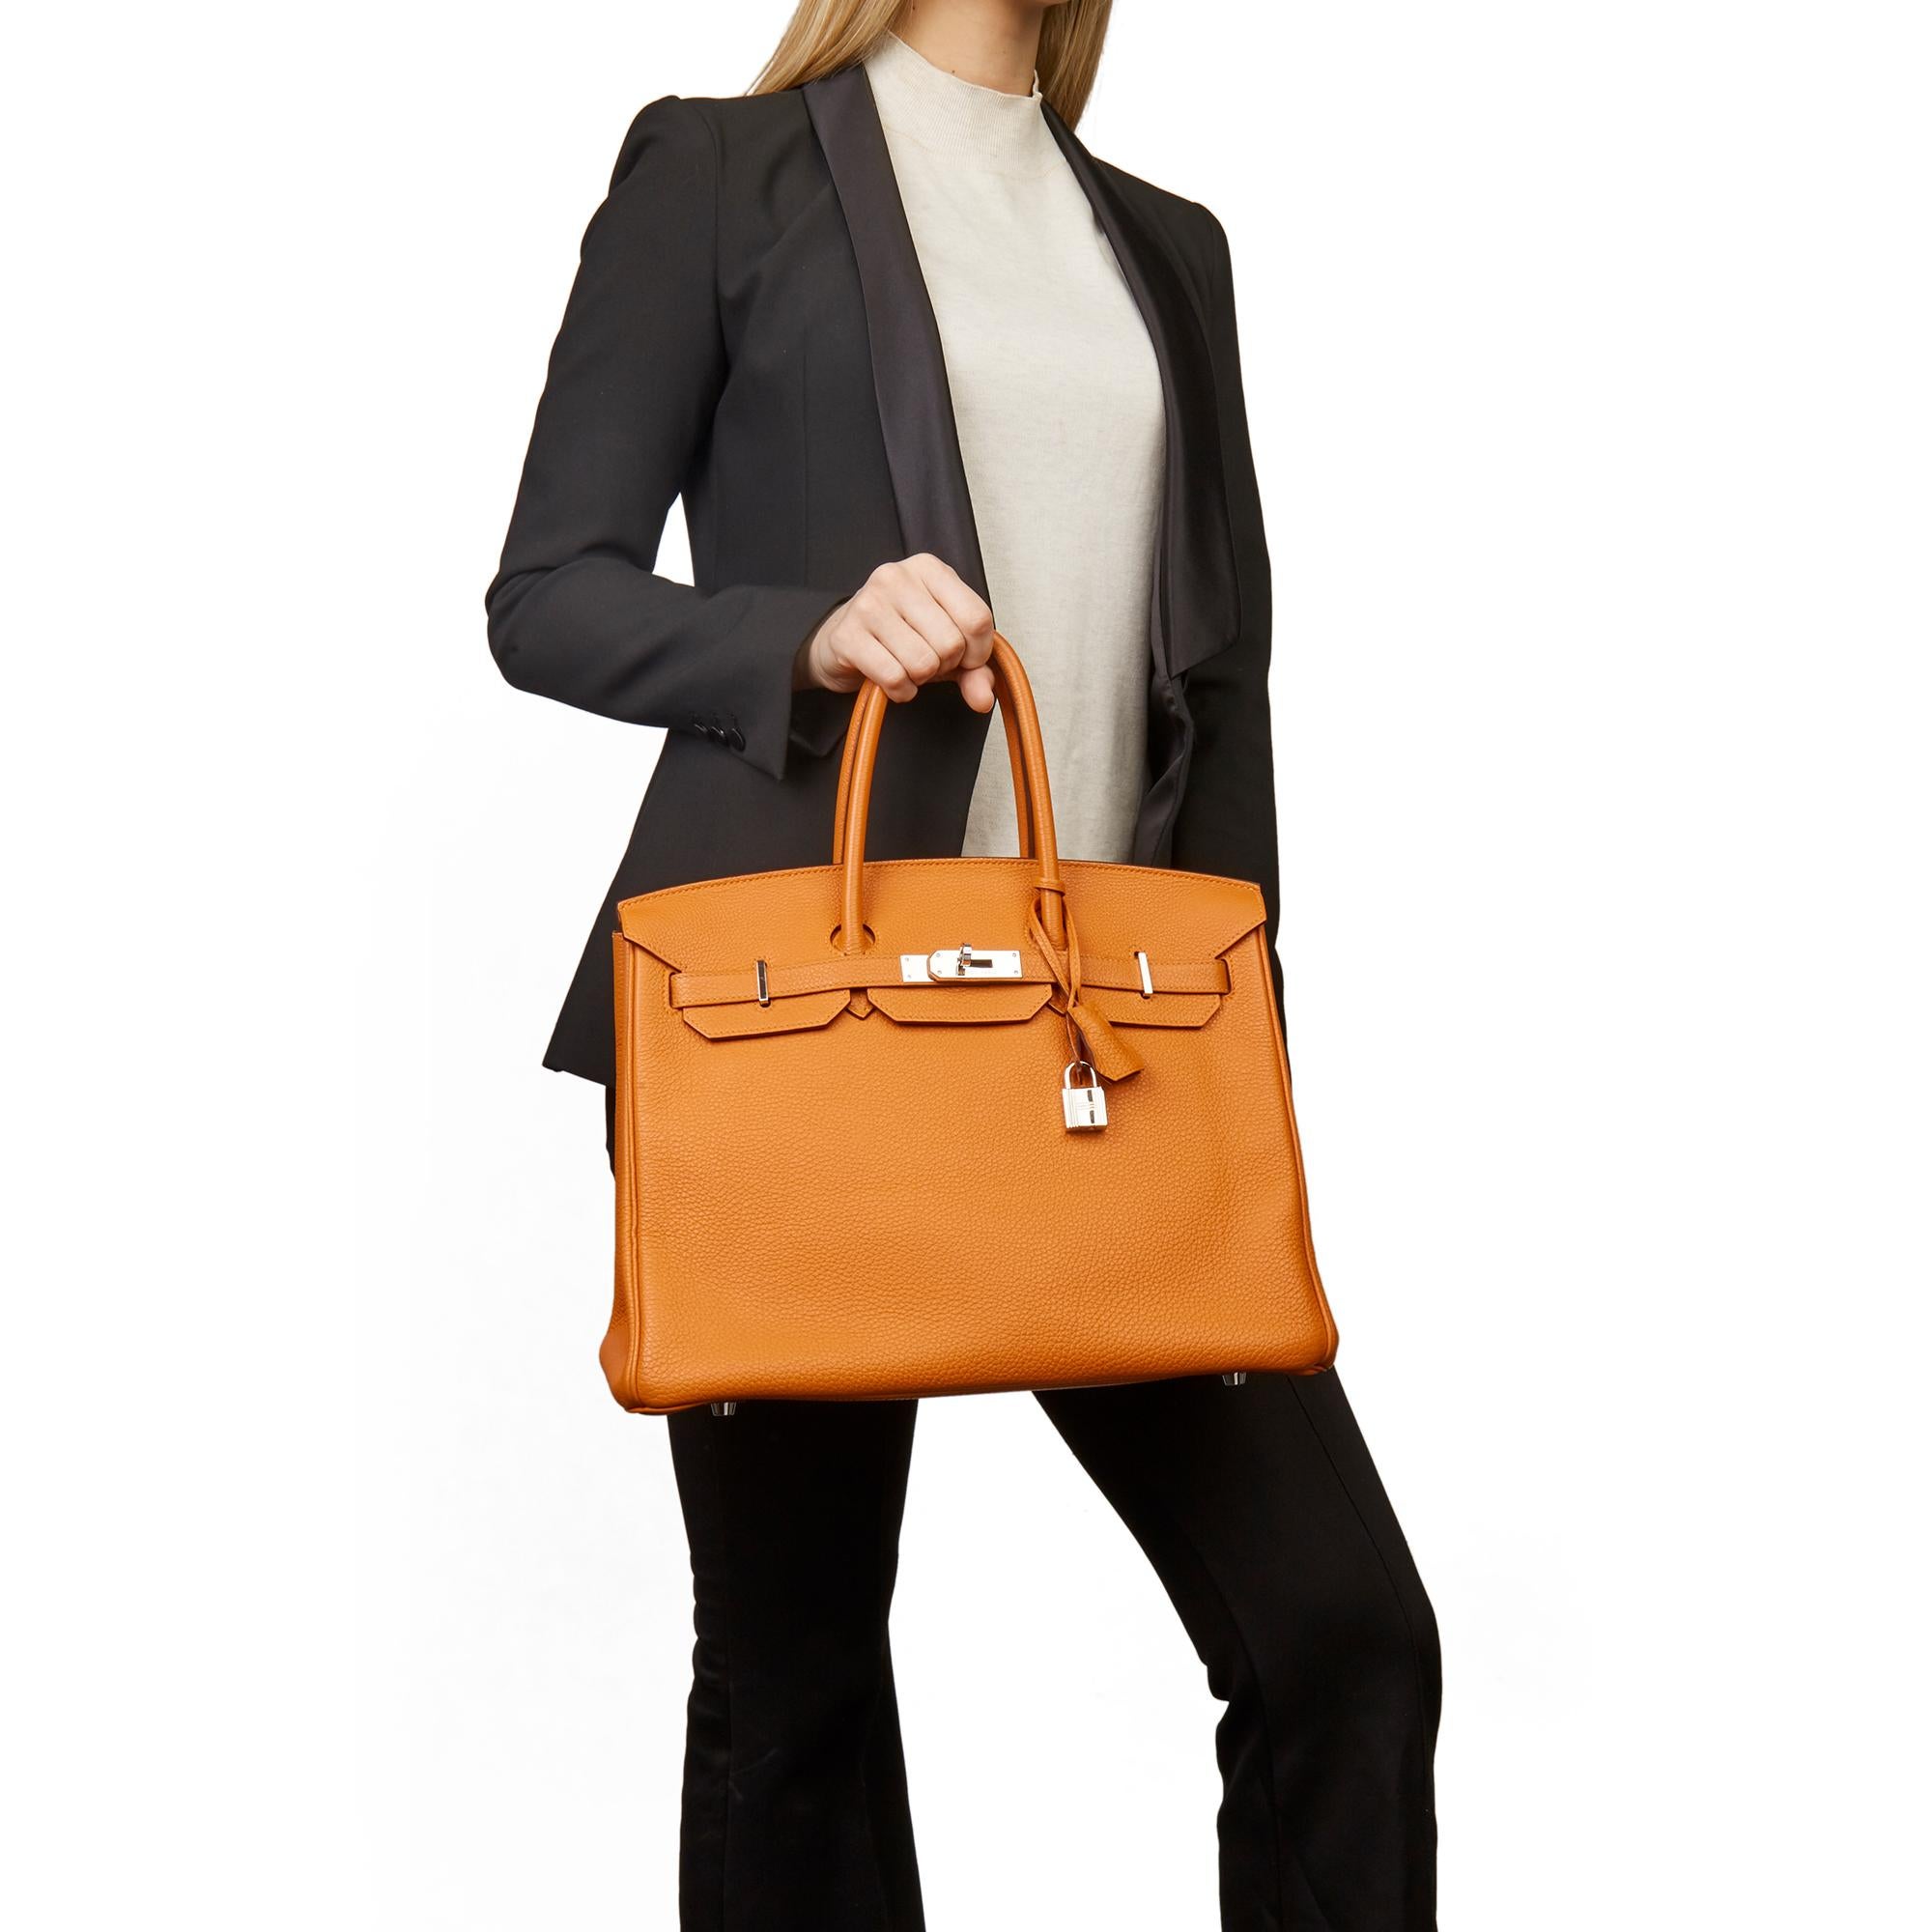 HERMÈS
Orange H Togo Leather Birkin 35cm

Xupes Reference: HB3383
Serial Number: [O]
Age (Circa): 2011
Accompanied By: Hermès Box, Dust Bag, Padlock, Keys, Clochette, Care Booklet, Rain Cover, Protective Felt
Authenticity Details: Date Stamp (Made